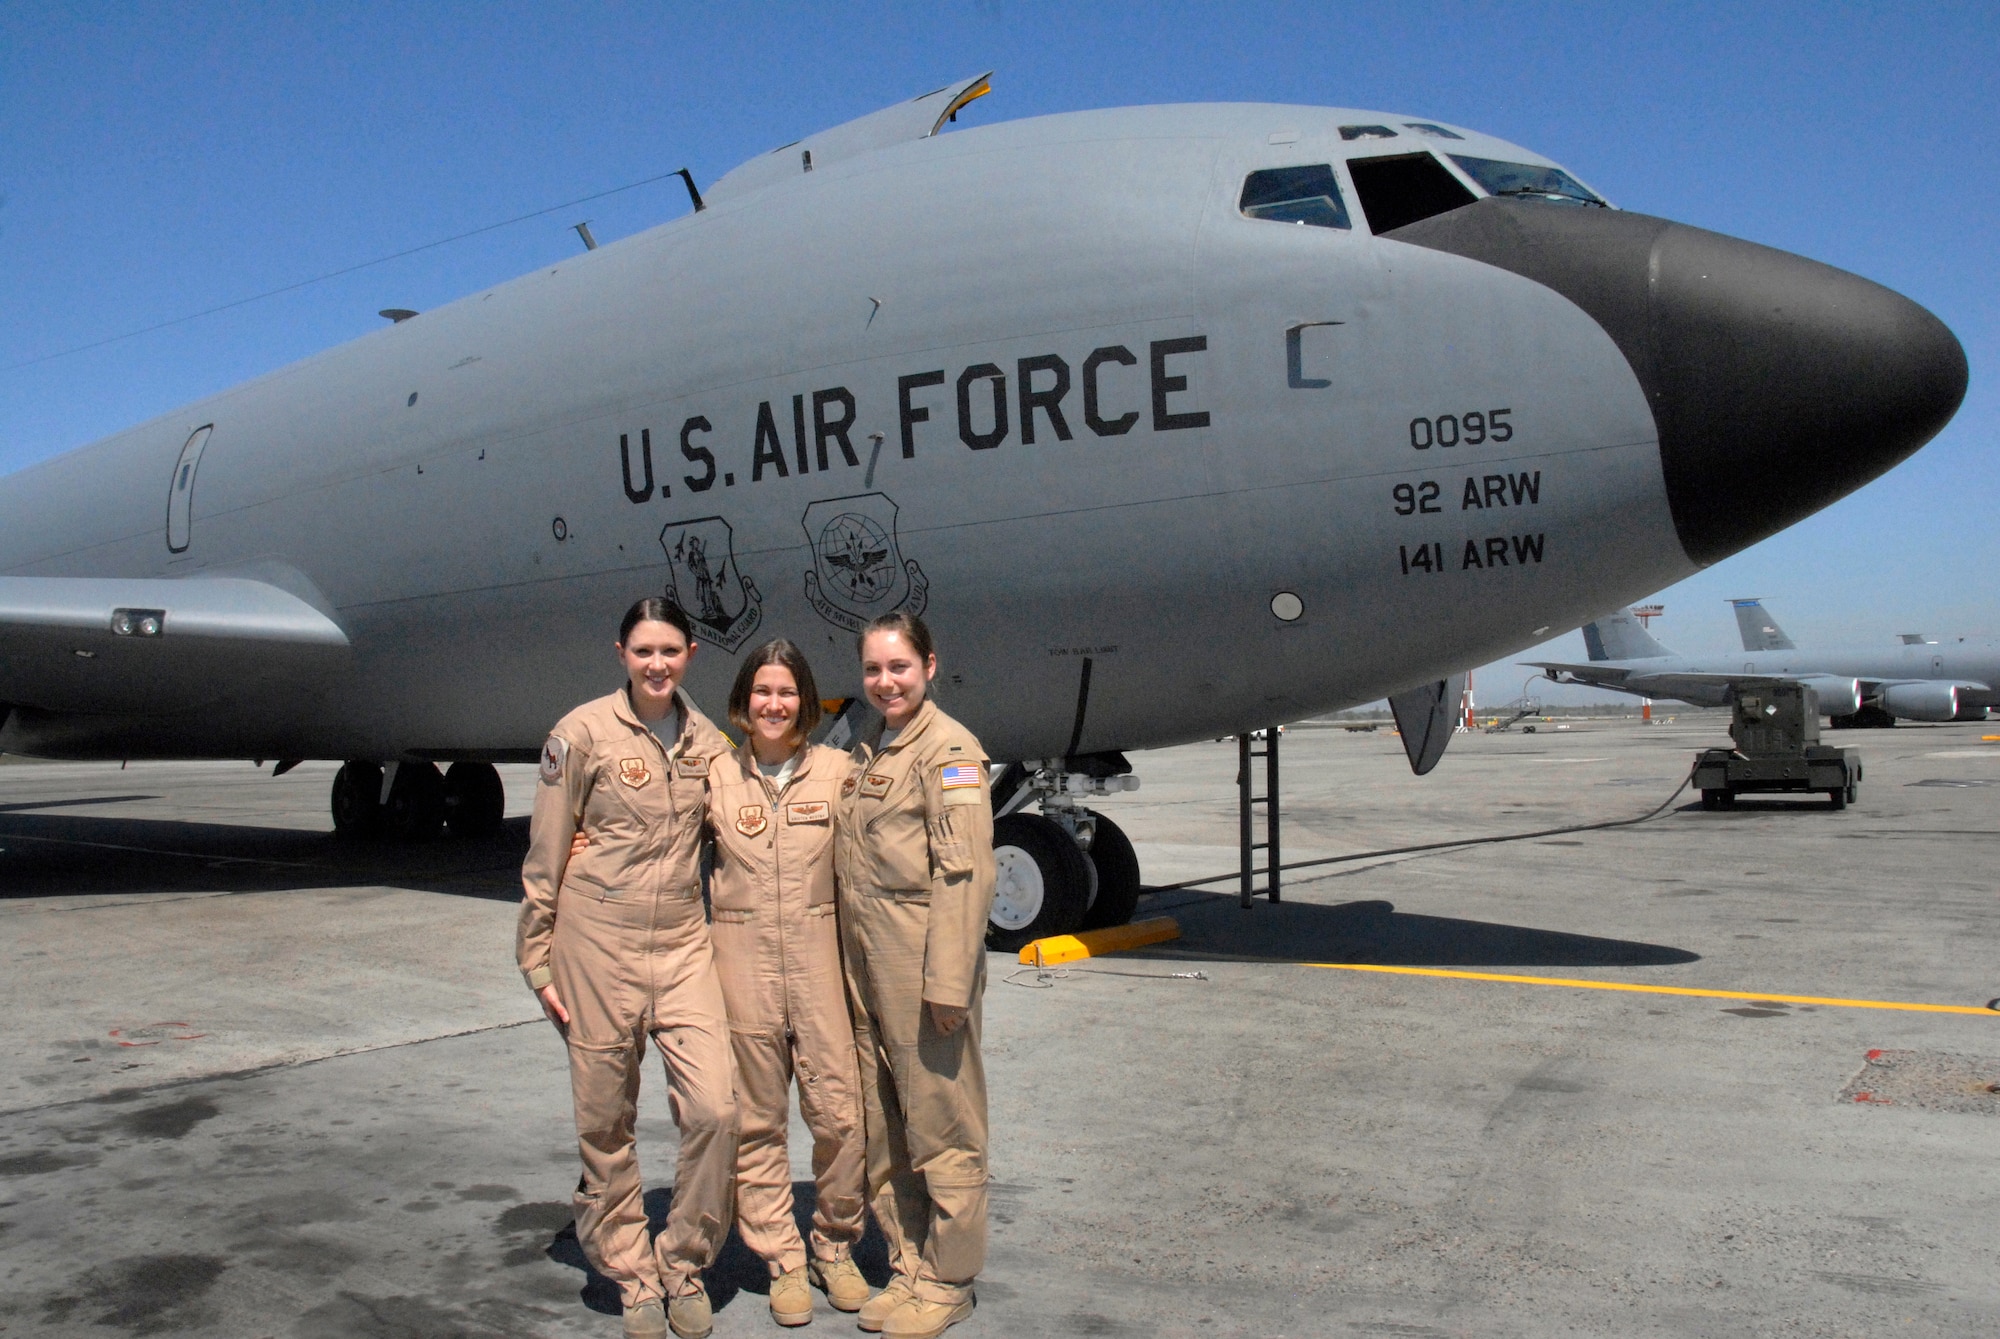 (Left to right)Airman 1st Class Tracy Johnson, boom operator, Maj. Kristen Westby, pilot and 1st Lt. Melissa Evans, co-pilot, all with the 22nd Expeditionary Air Refueling Squadron, pose in front of a KC-135 Stratotanker before taking off for a refueling mission April 19, 2012, Transit Center at Manas, Kyrgyzstan. Johnson and Westby are deployed here from the 93rd Air Refueling Squadron at Fairchild Air Force Base, Wash. Evans is deployed here from the 912th Air Refueling Squadron at March Air Reserve Base, Calif. (U.S. Air Force photo/Senior Airman Lynsie Nichols)